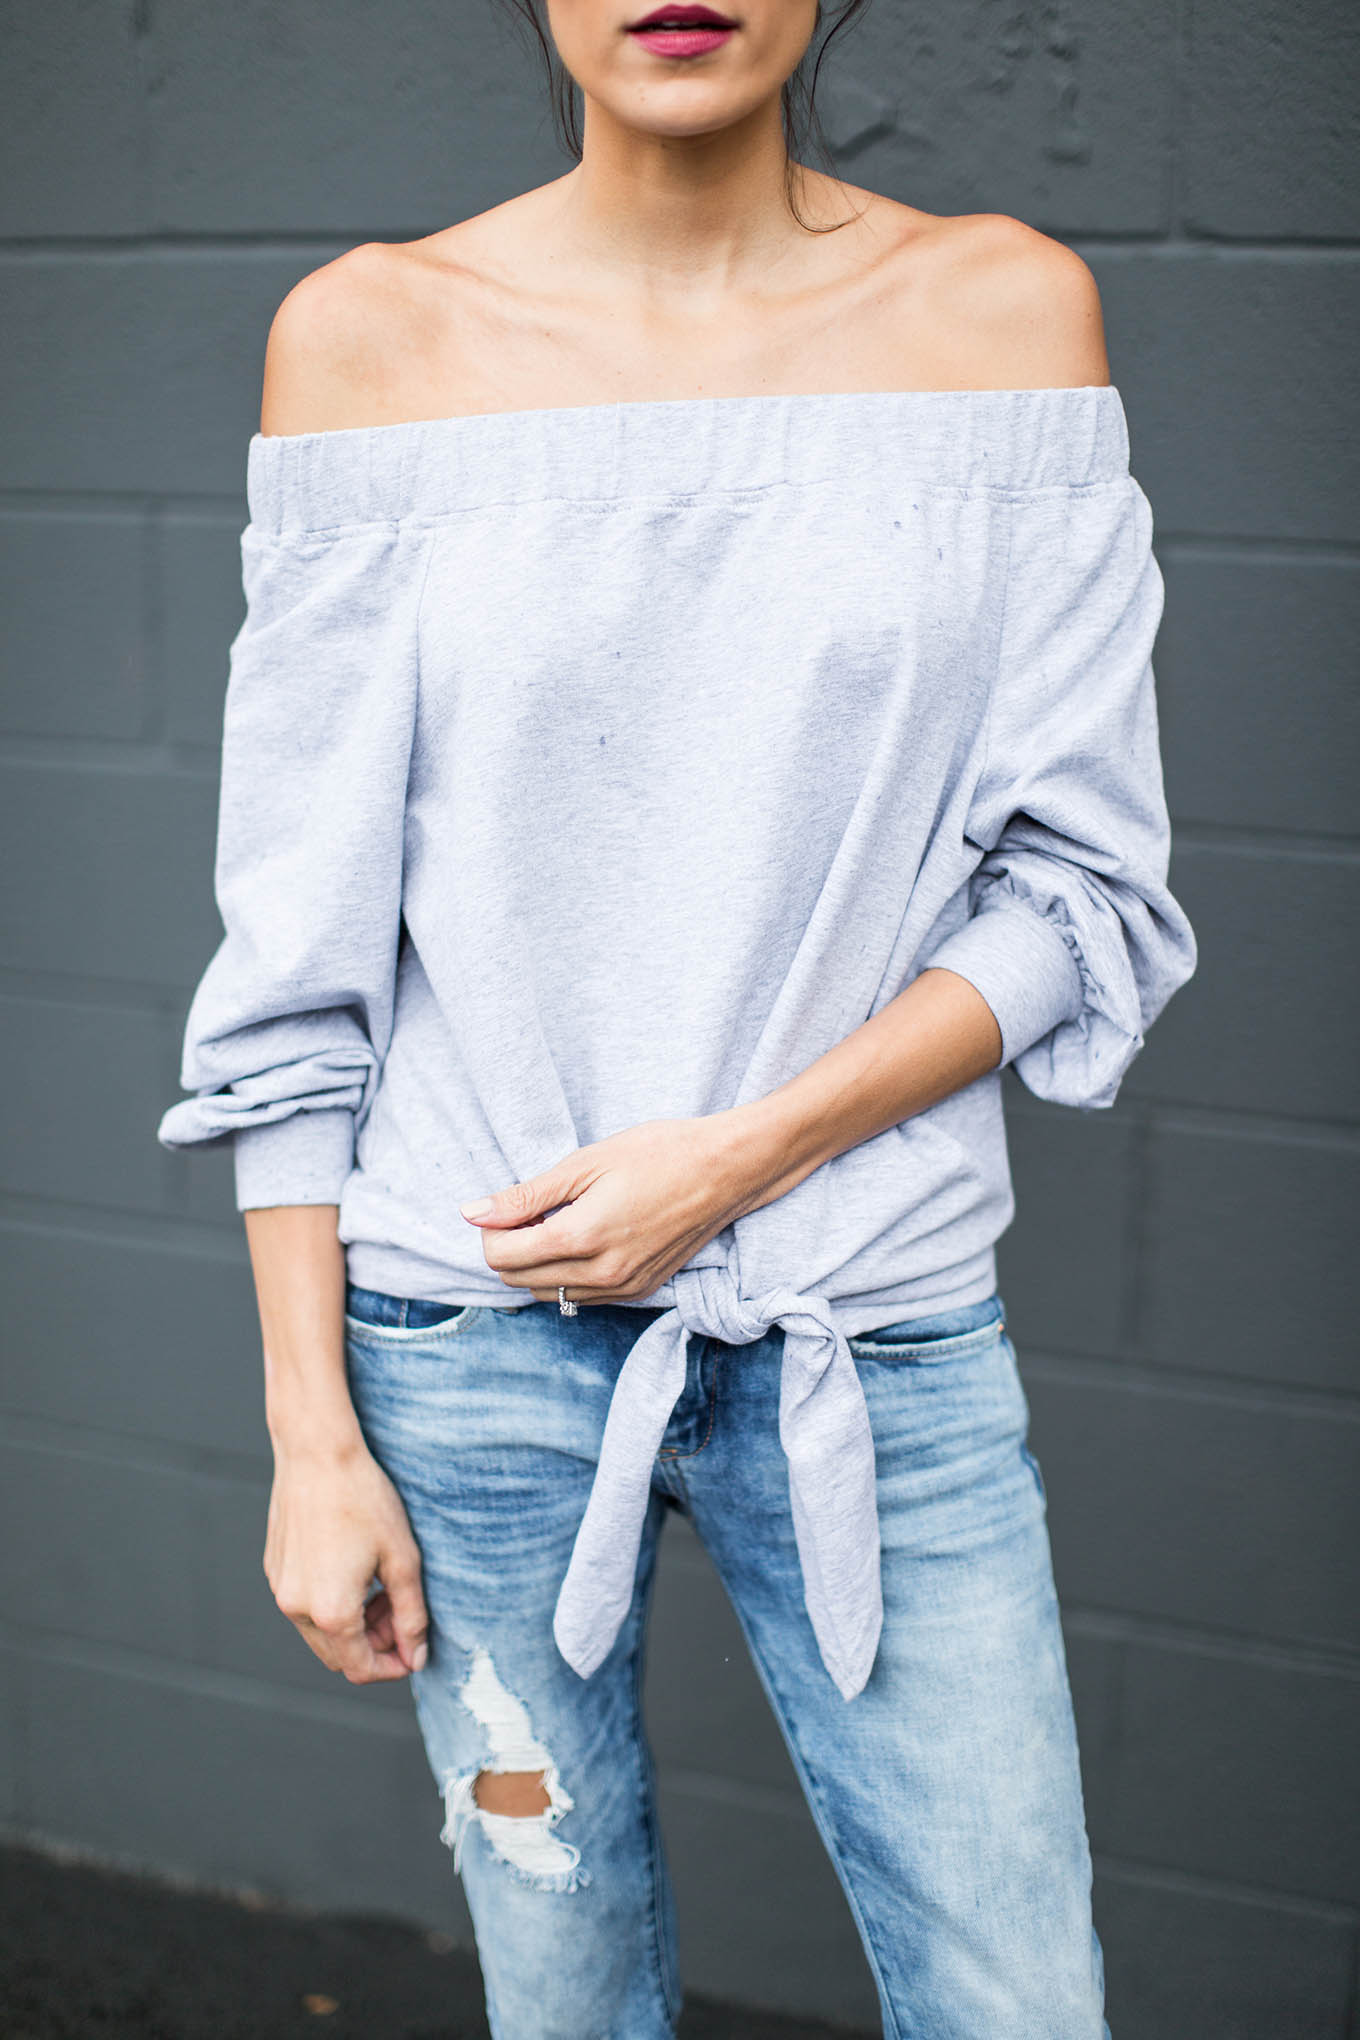 ily couture grey off-the-shoulder